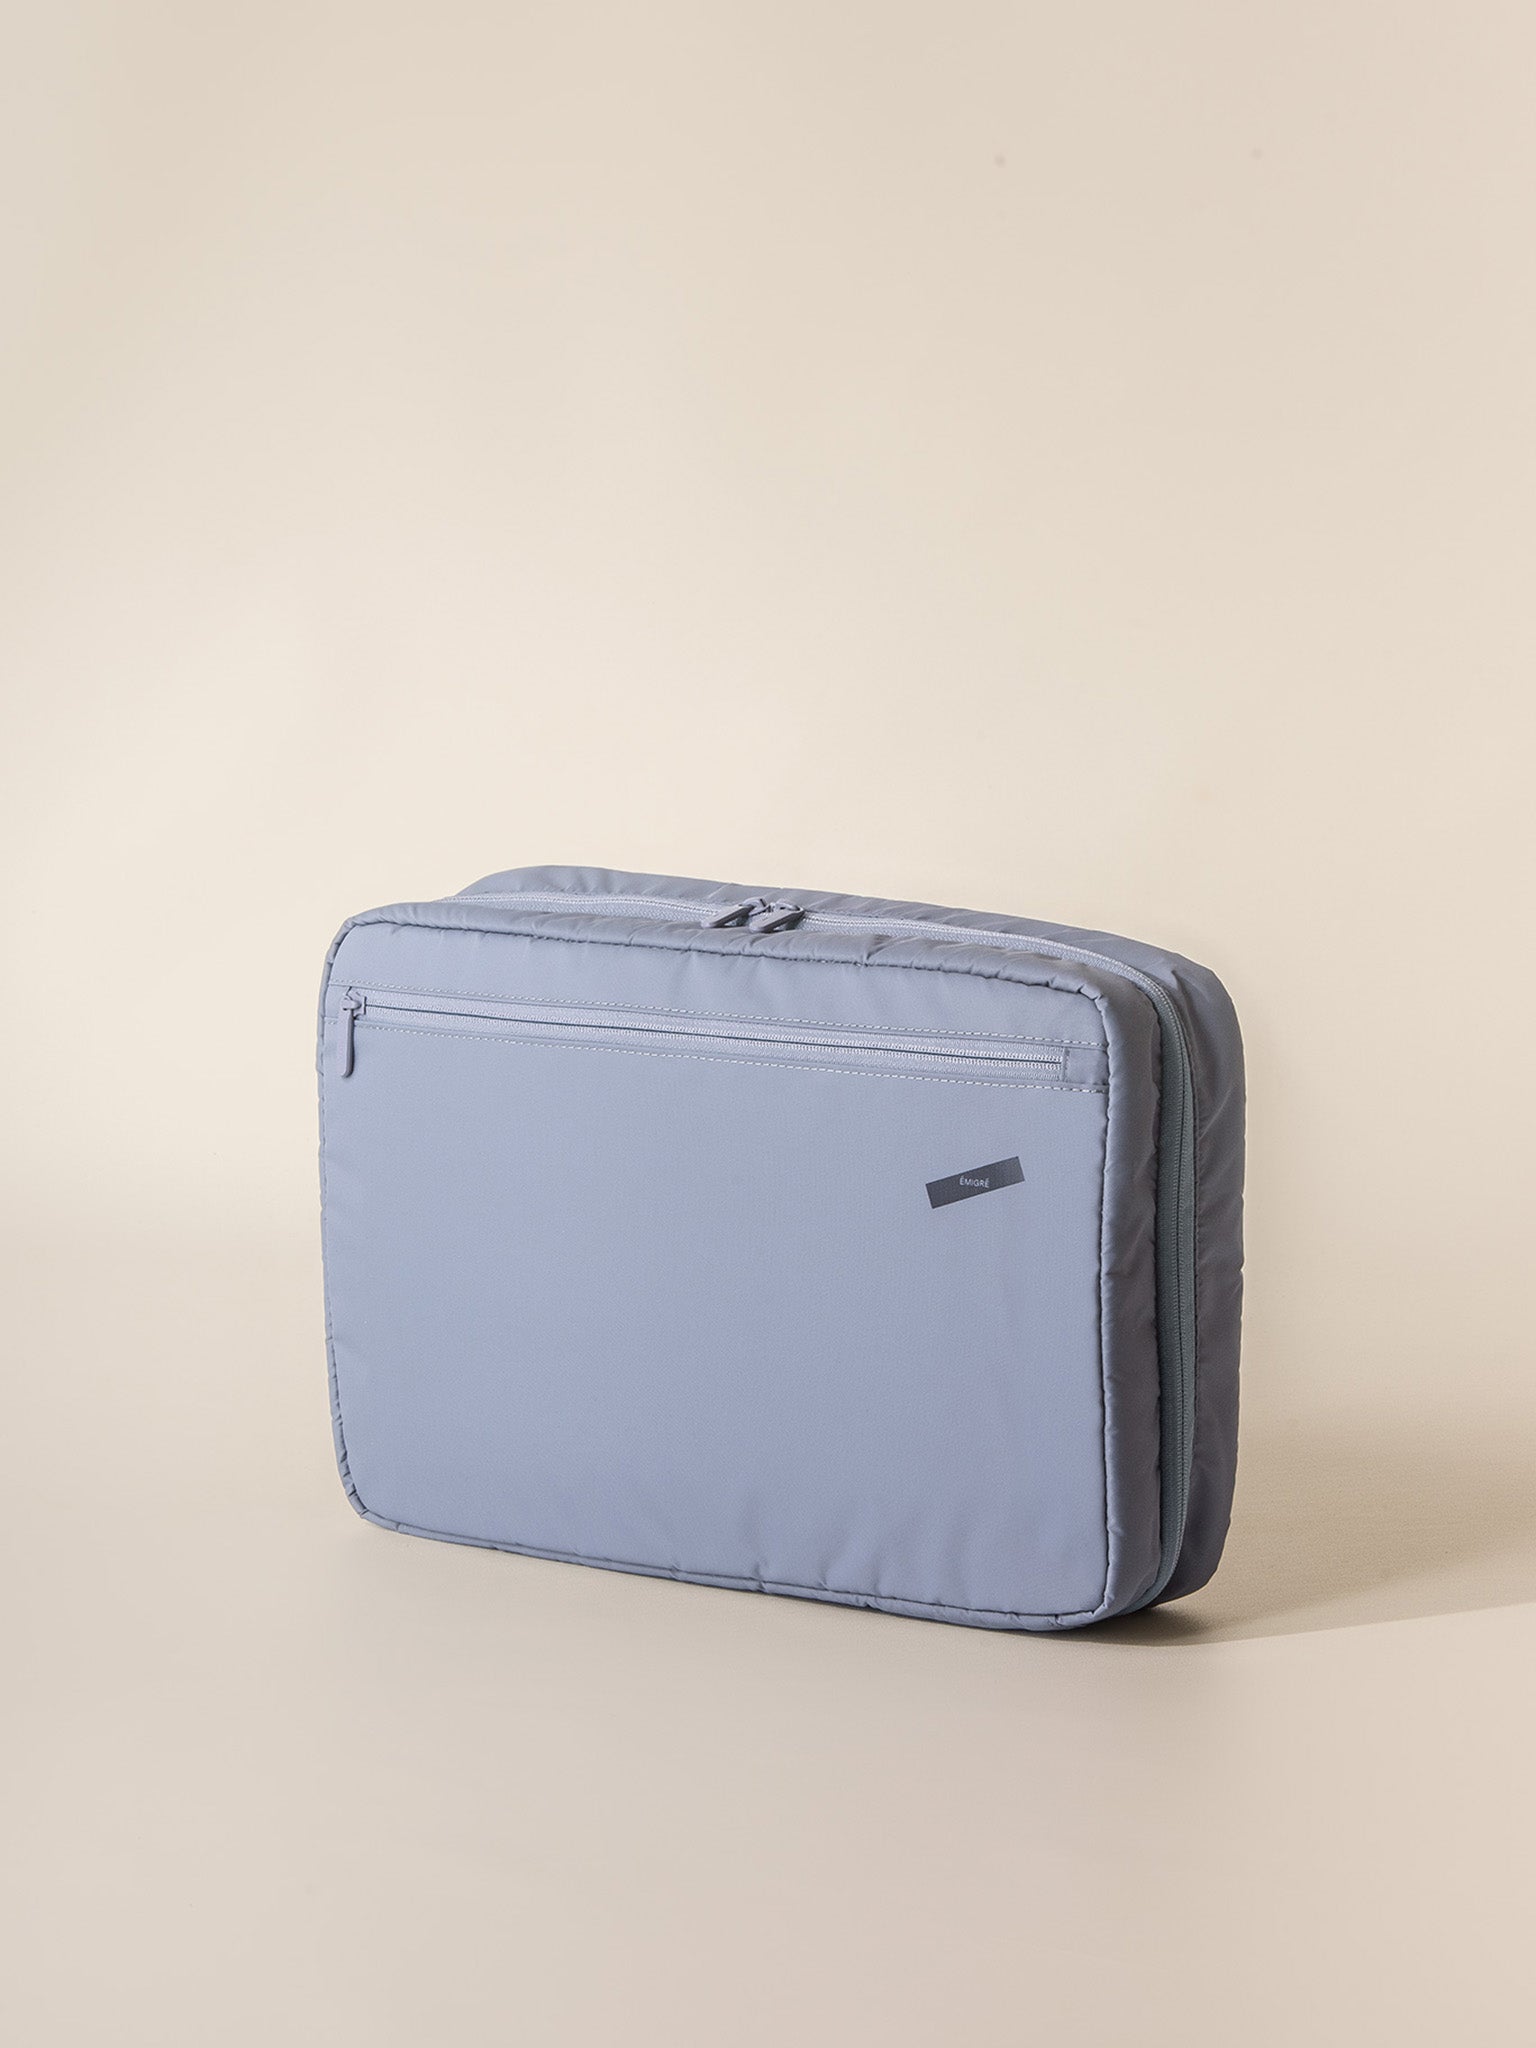 A smart and streamlined garment organizer for all your clothing essentials.